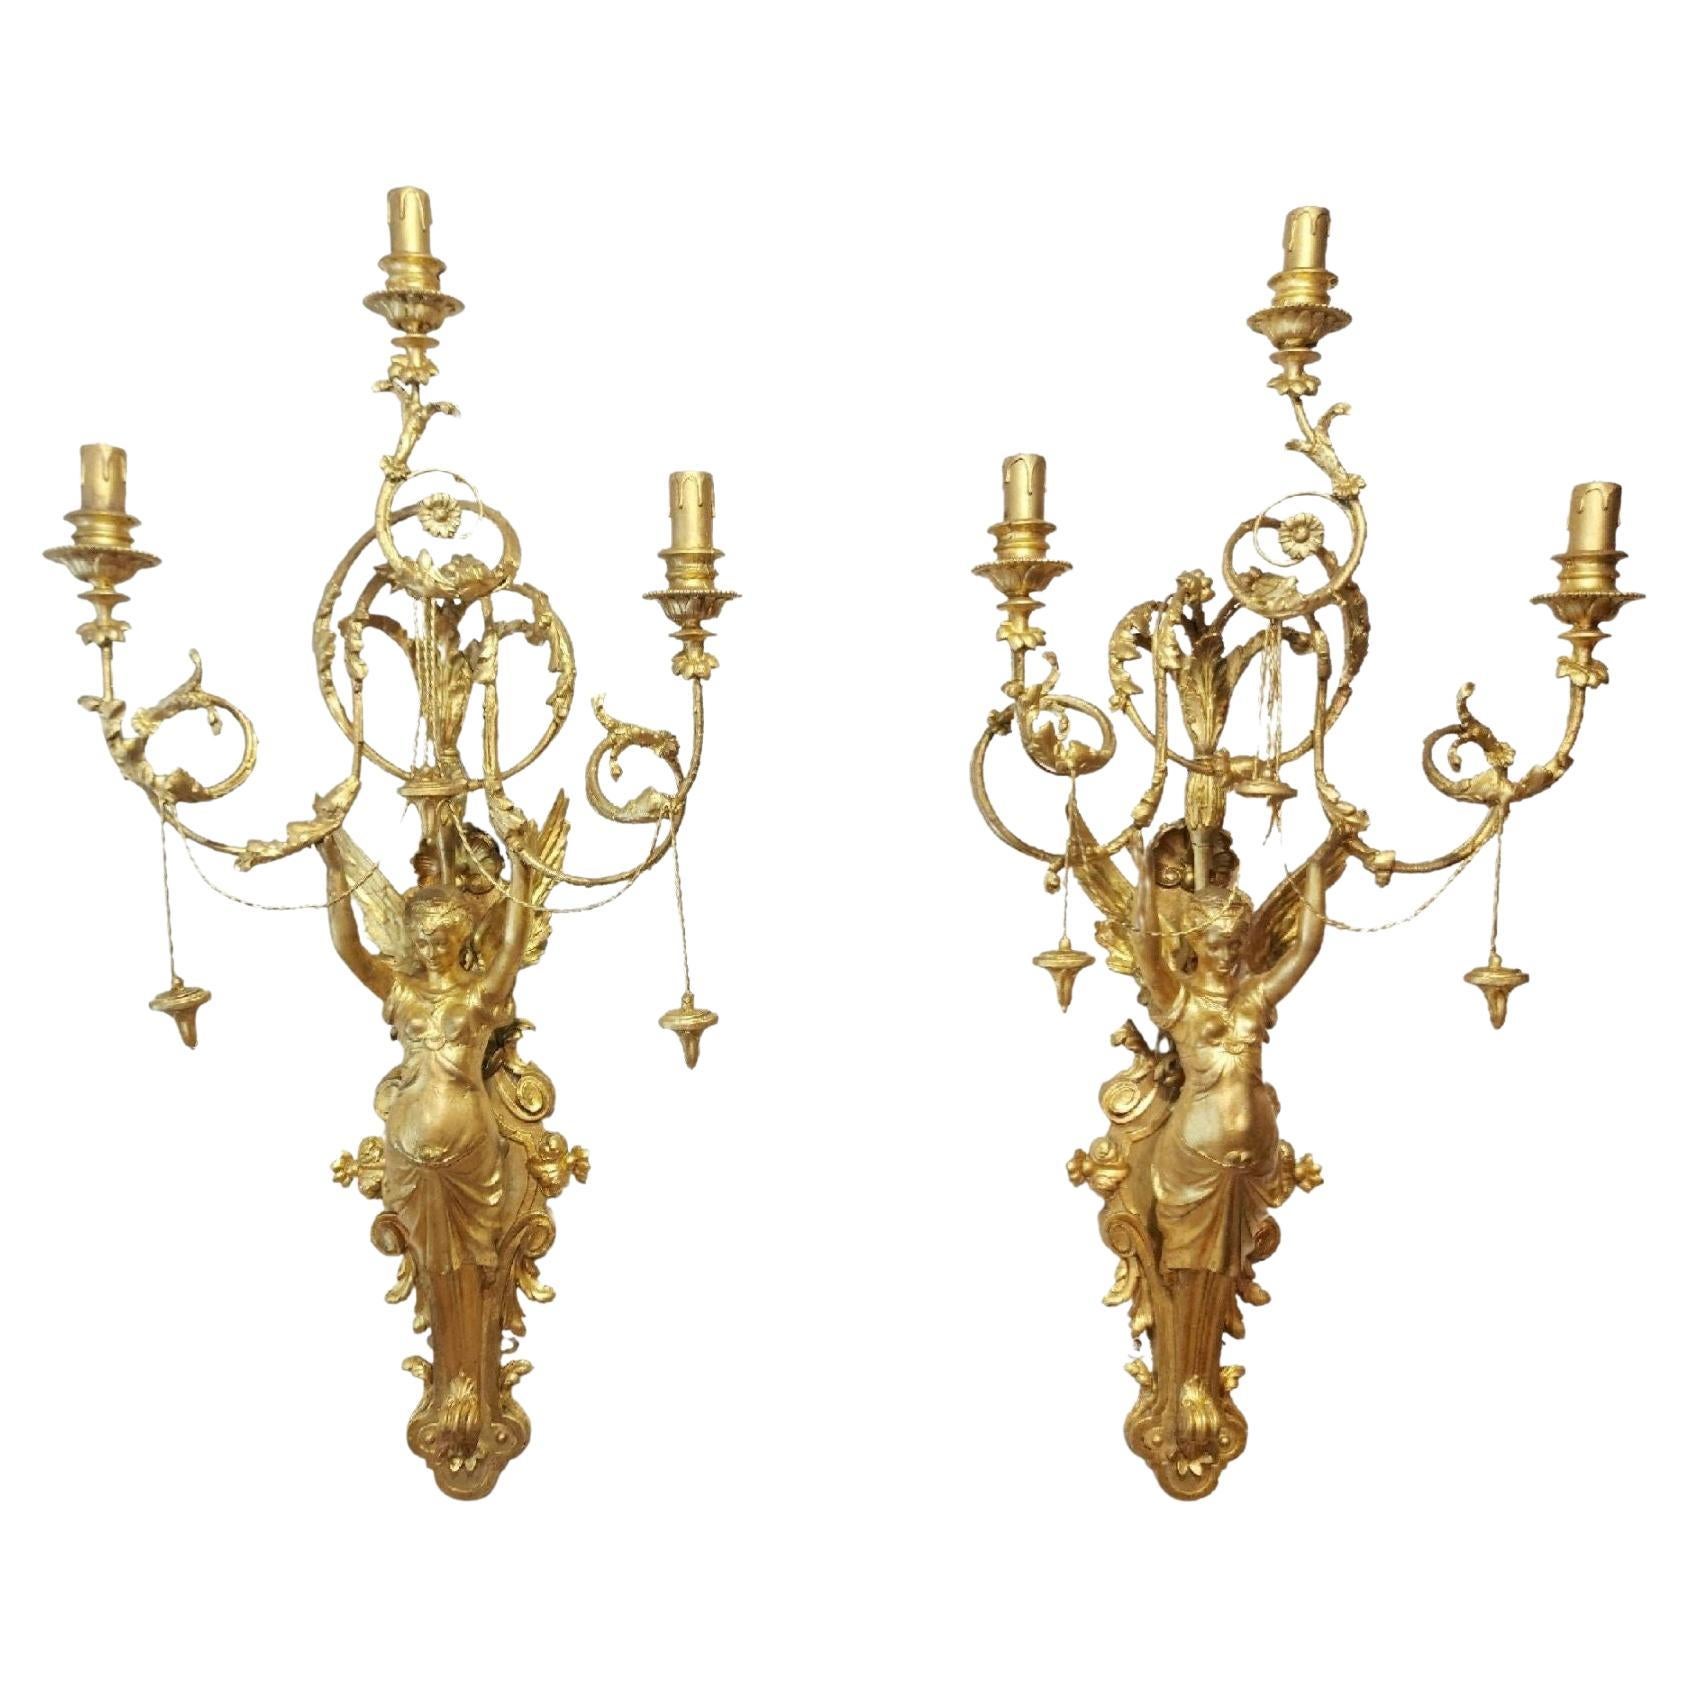 Pair of Italian Neoclassic Empire Gilt Wood Wall Sconces